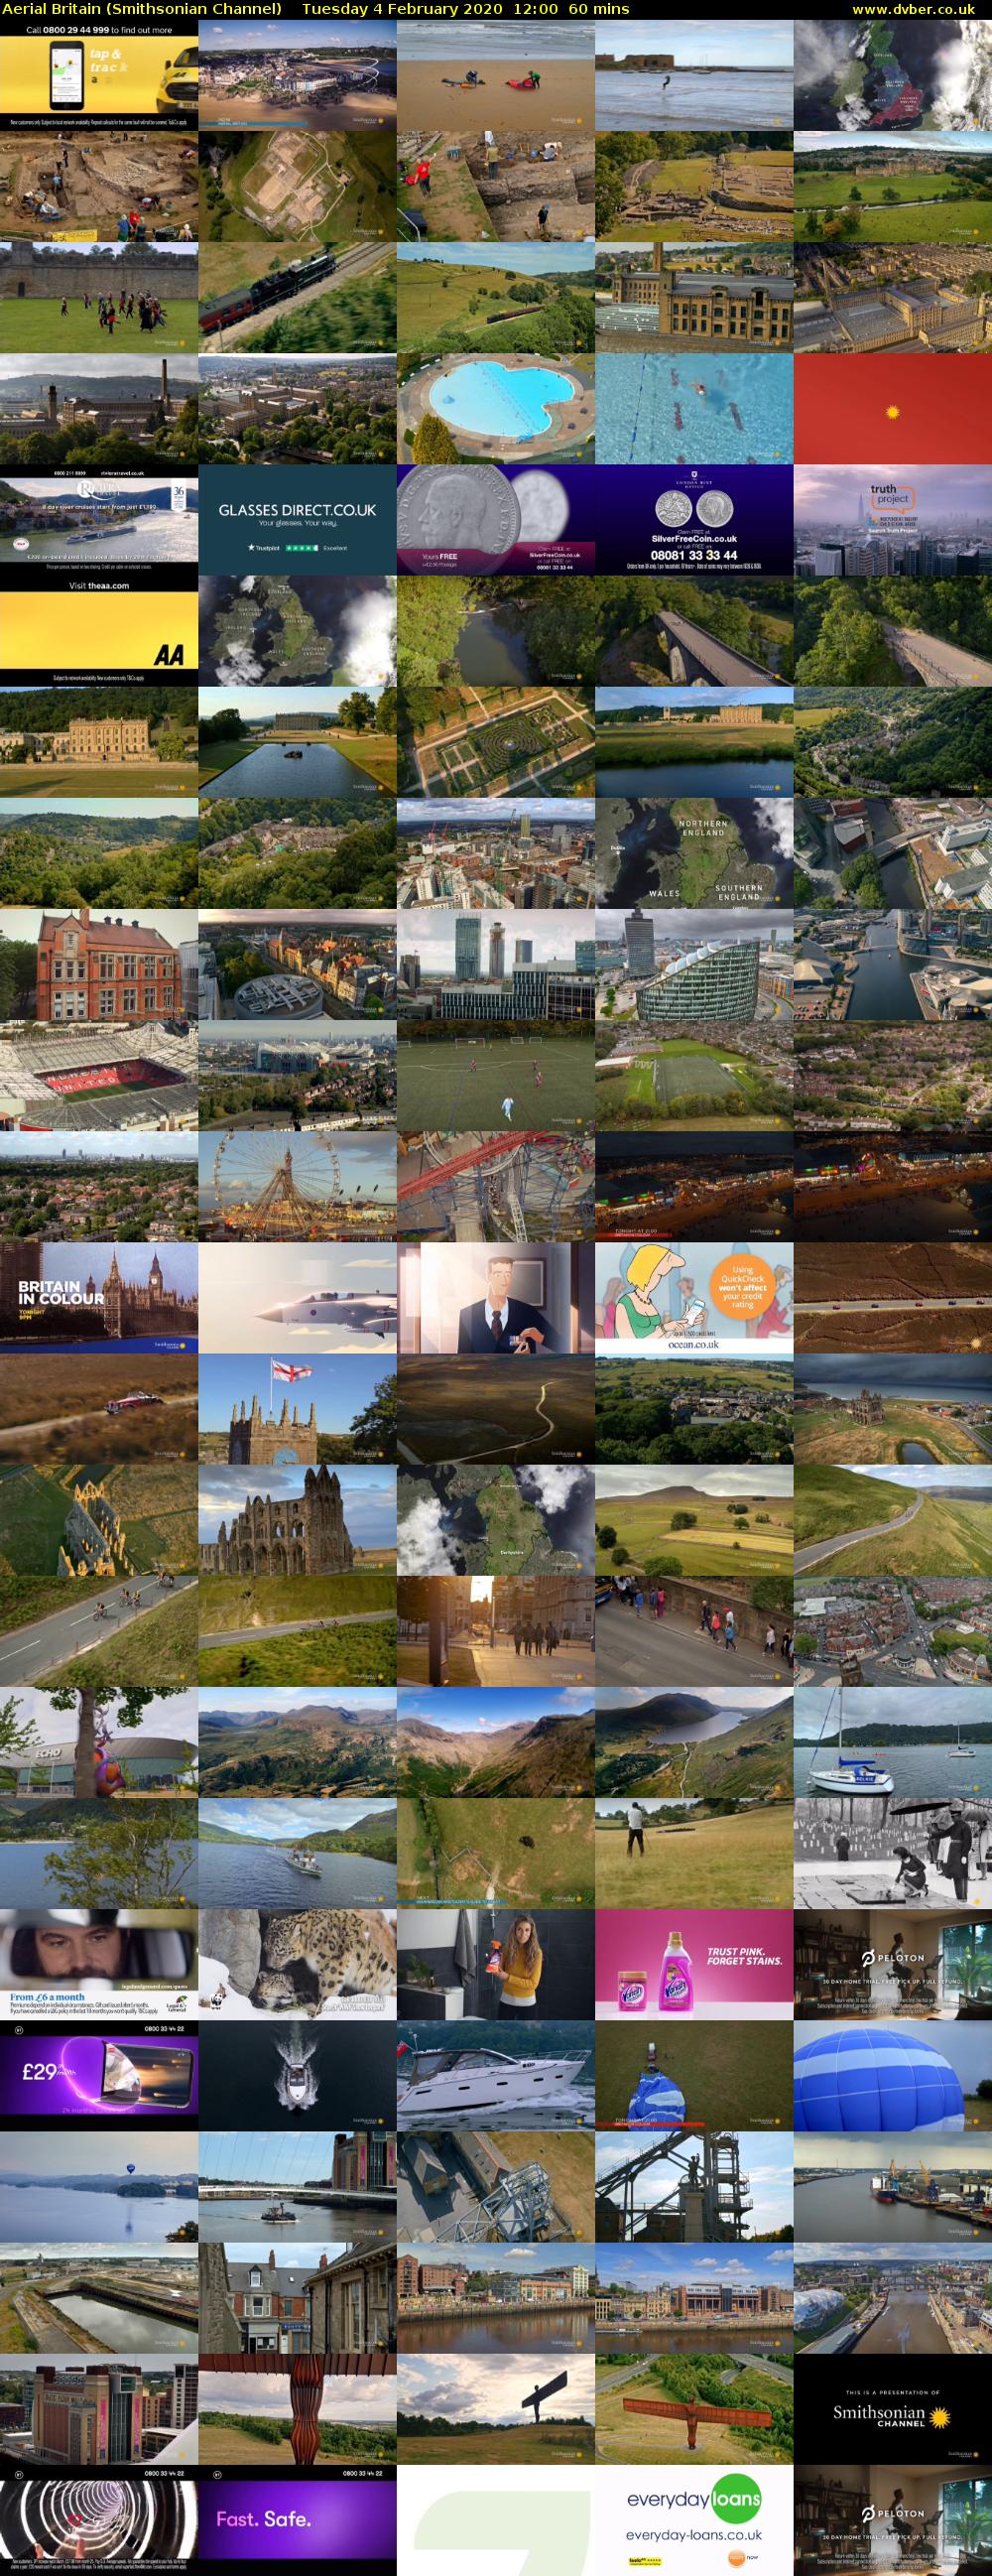 Aerial Britain (Smithsonian Channel) Tuesday 4 February 2020 12:00 - 13:00